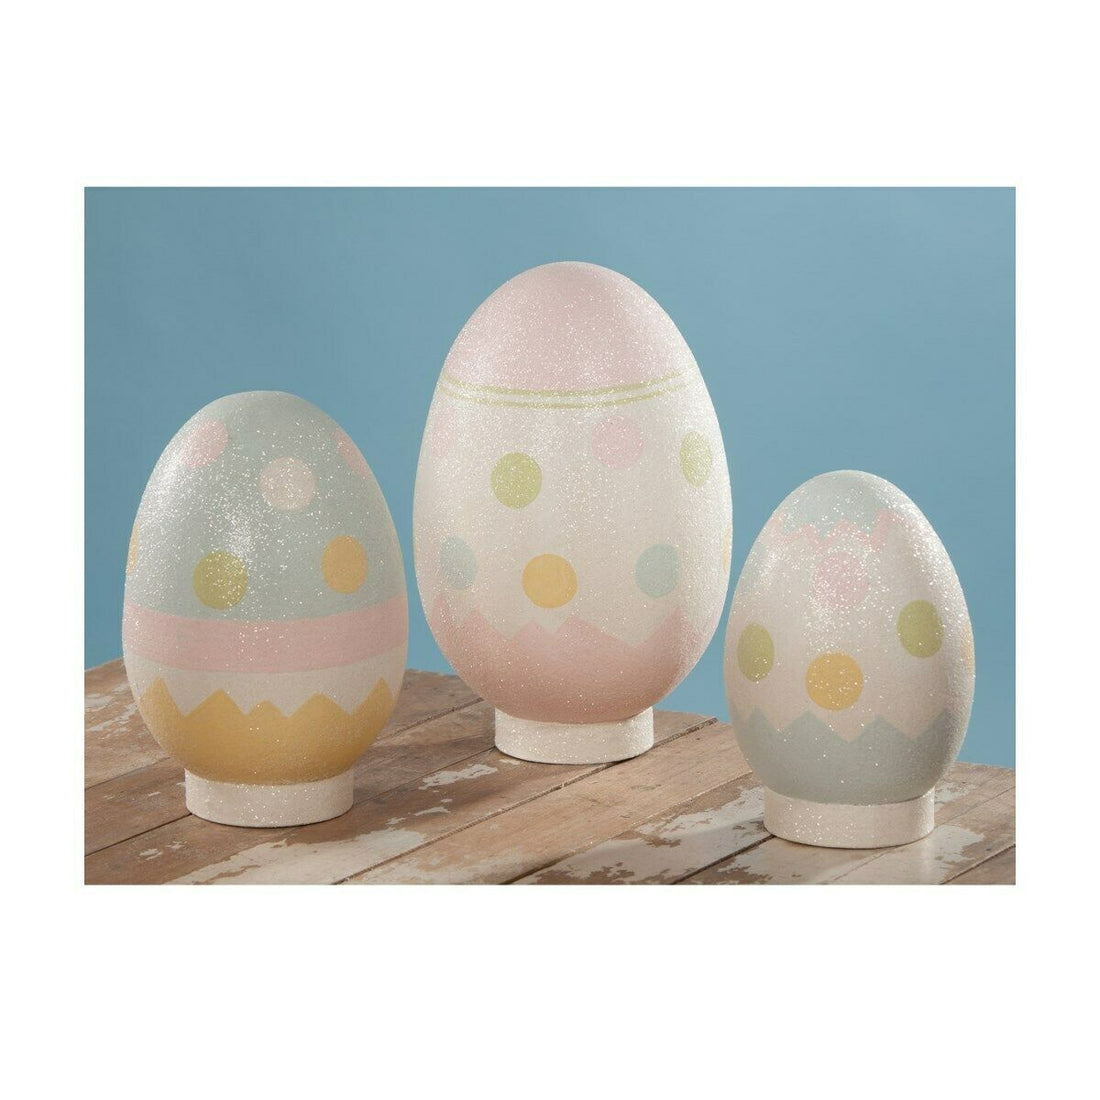 Bethany Lowe Spring/Easter 3 pc Paper Mache Large Easter Eggs - The Primitive Pineapple Collection